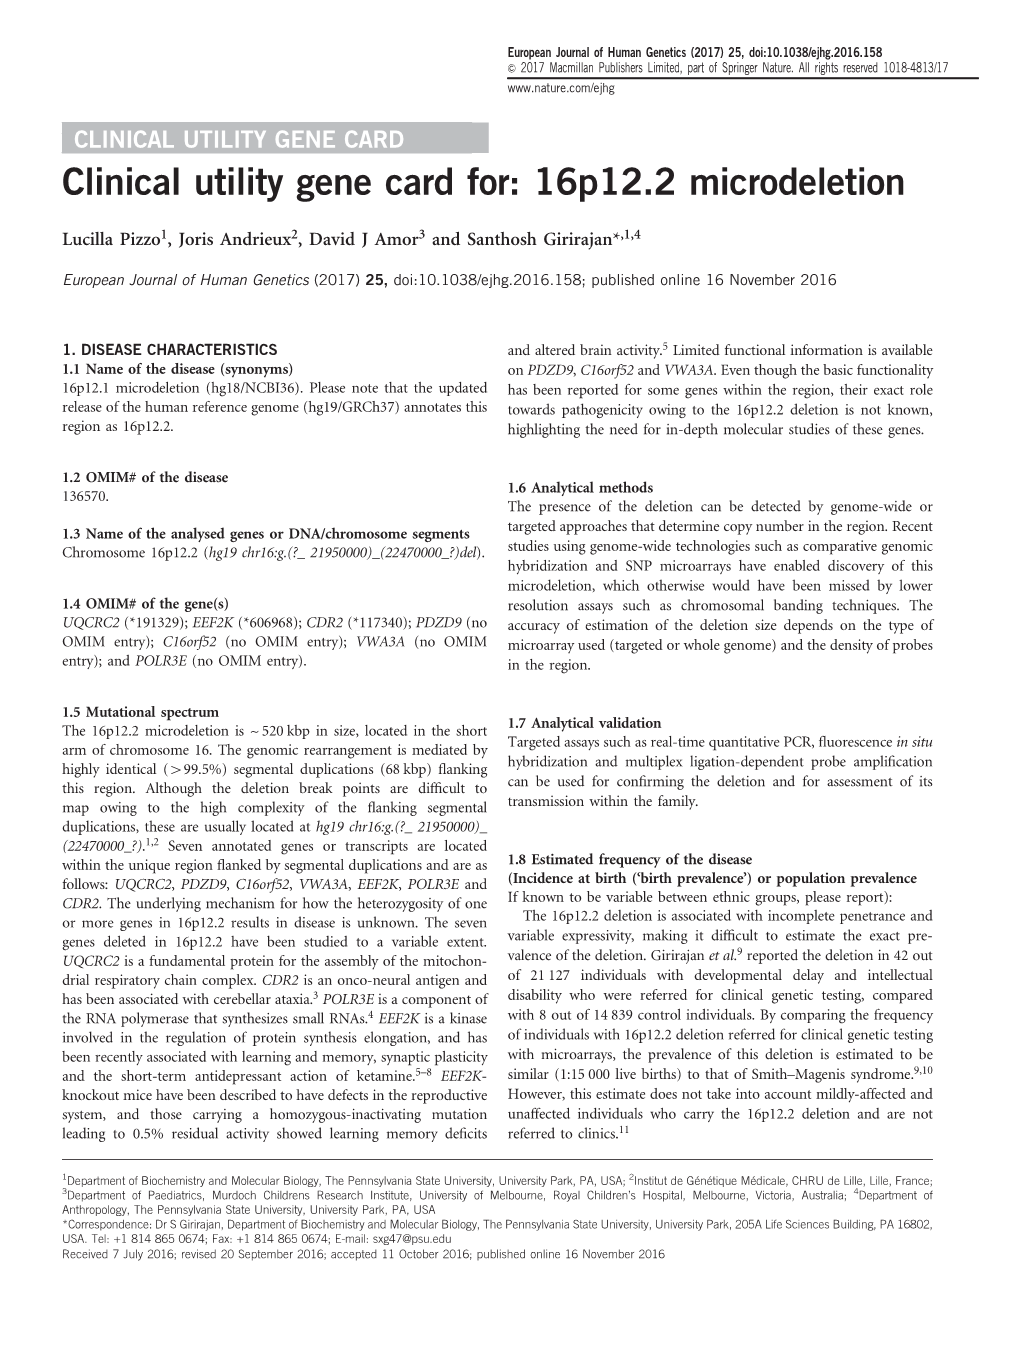 Clinical Utility Gene Card For: 16P12.2 Microdeletion